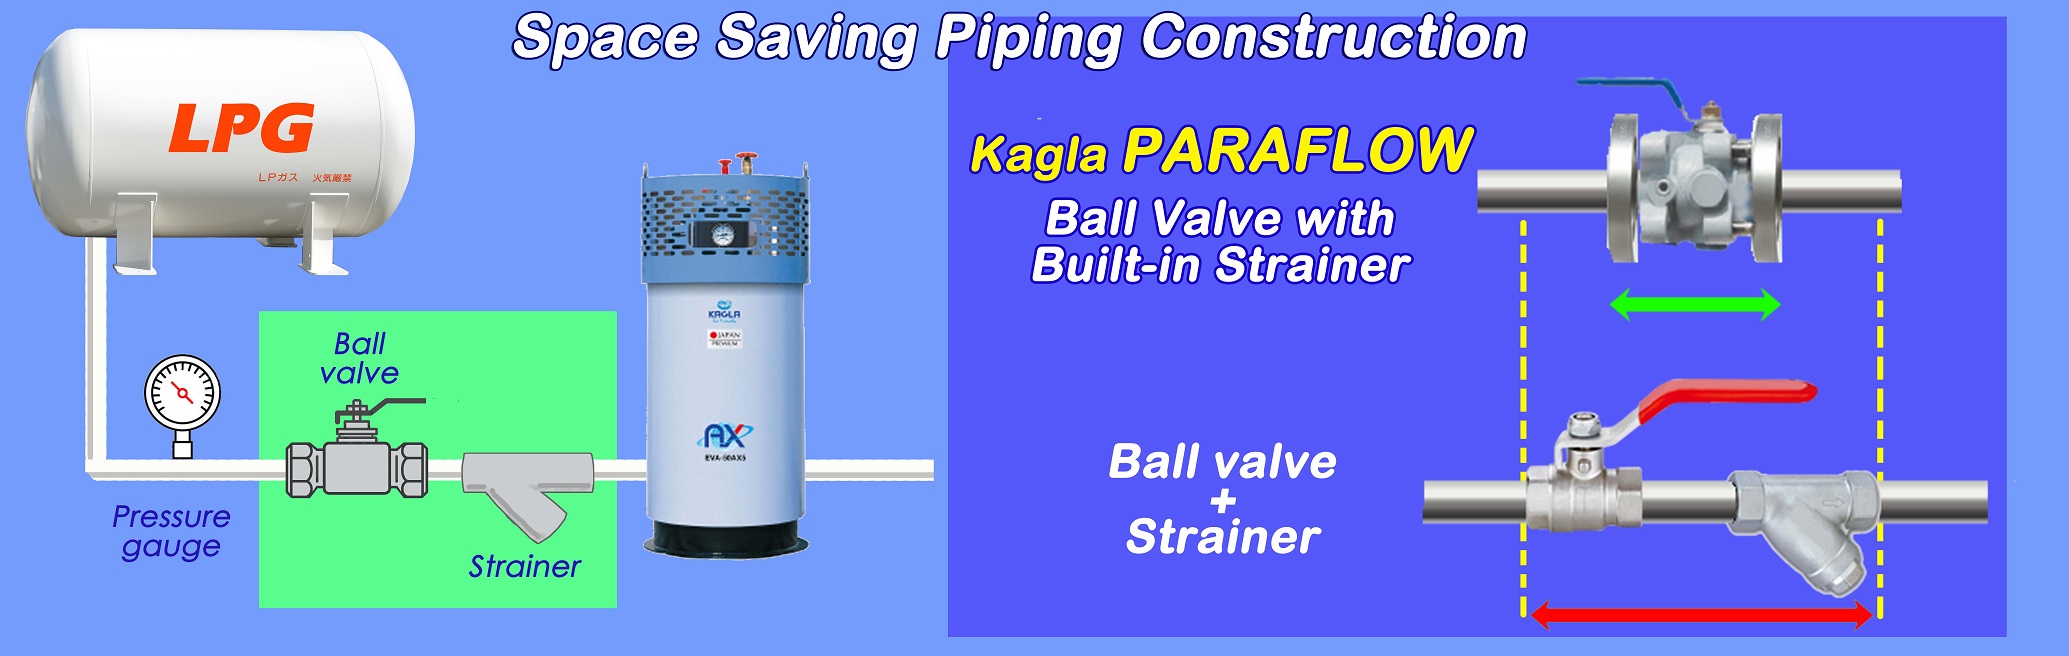 PARAFLOW installation for space saving piping construction